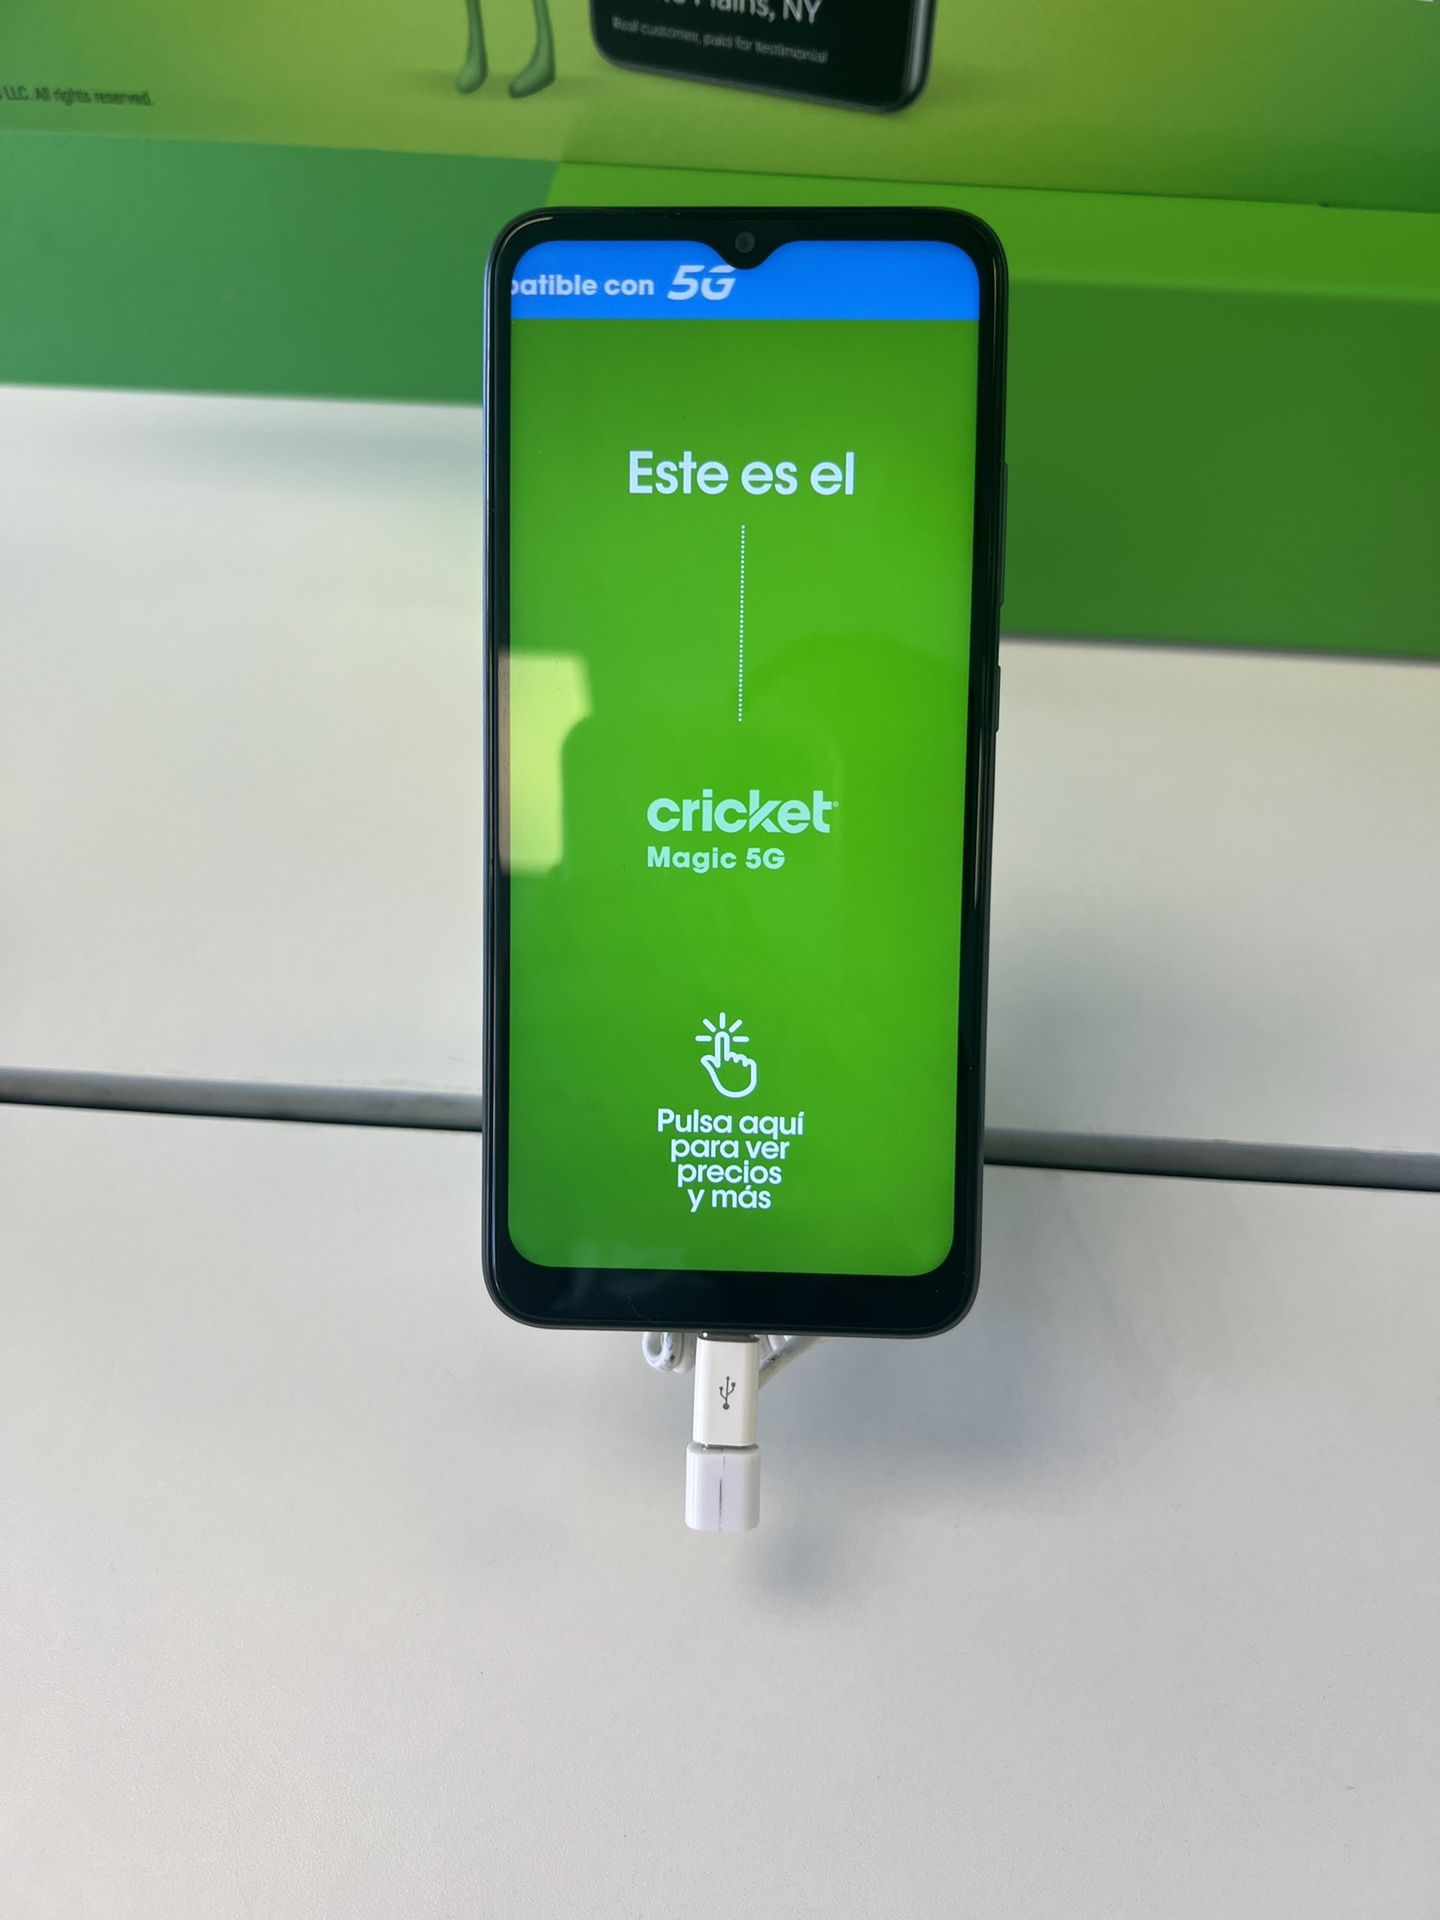 Cricket Magic 5g For Free! 